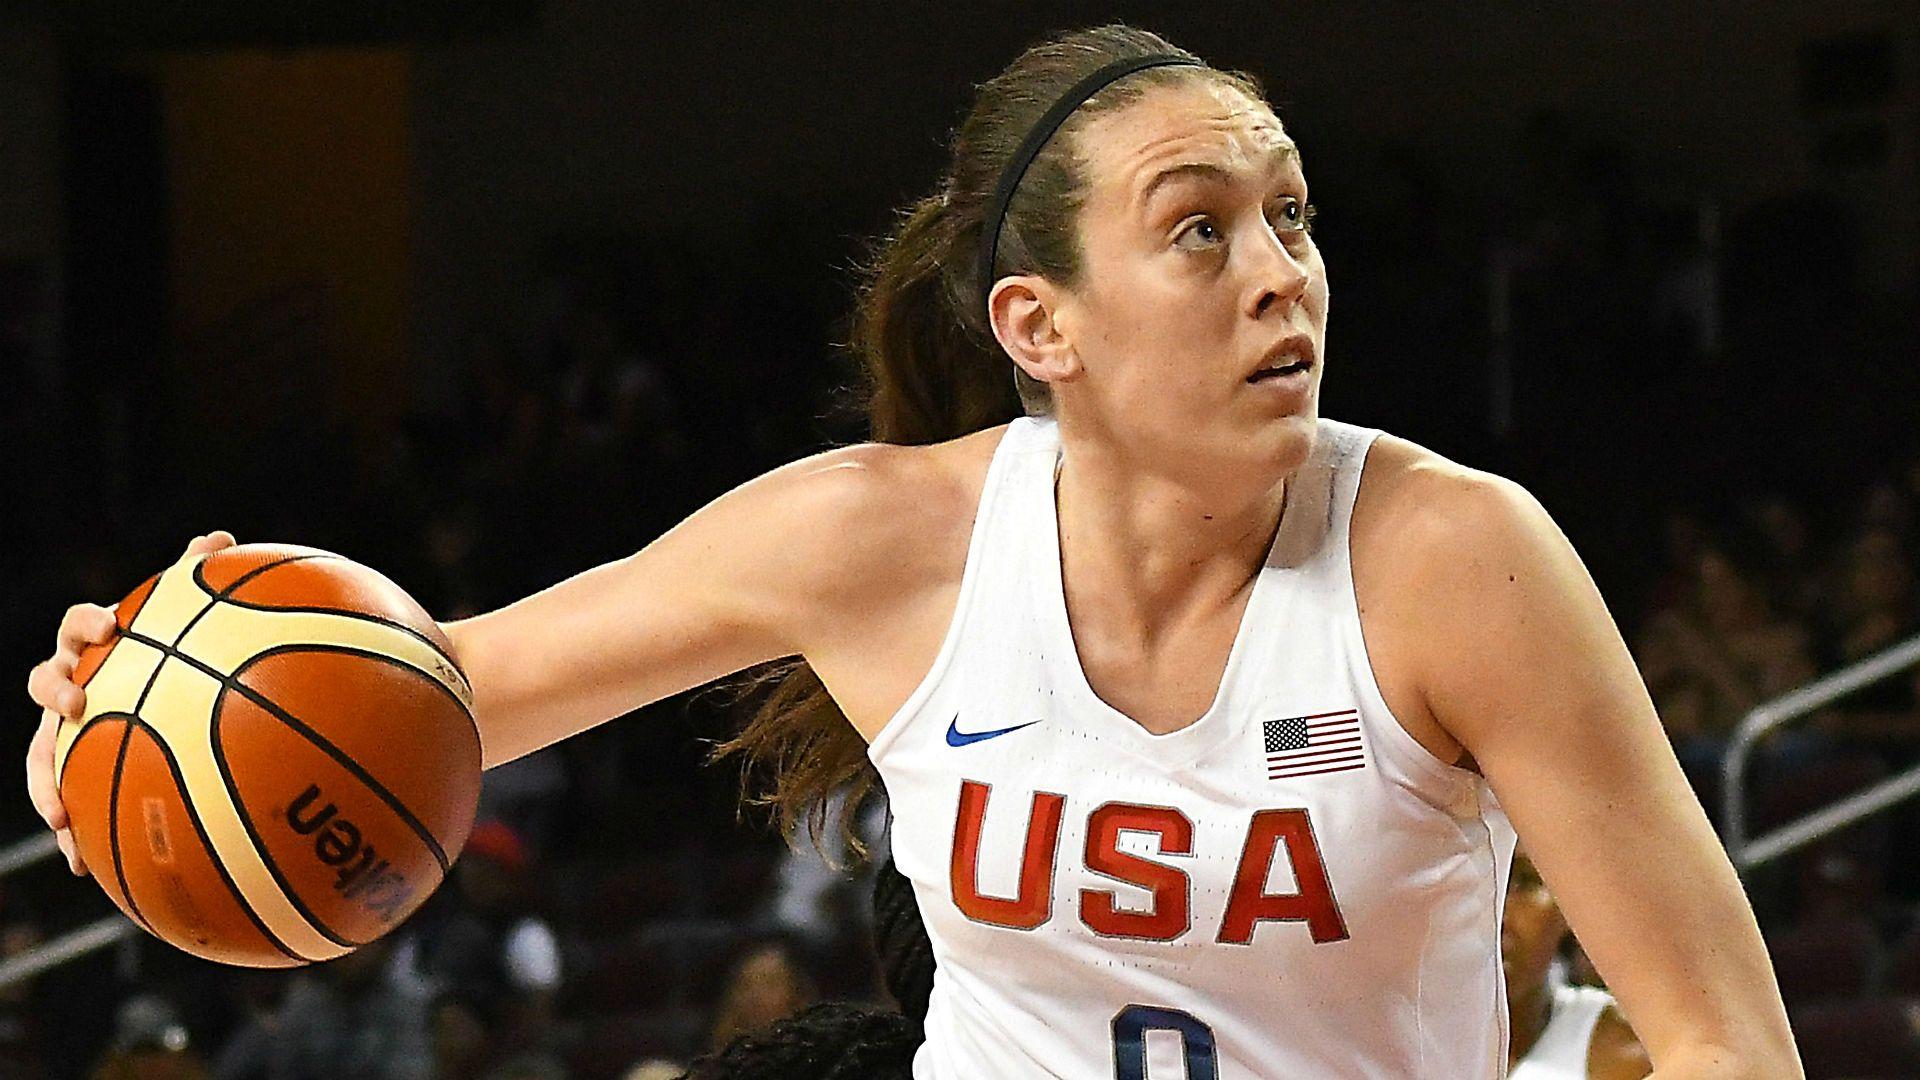 Seattle Storm star Breanna Stewart says she was molested as a child